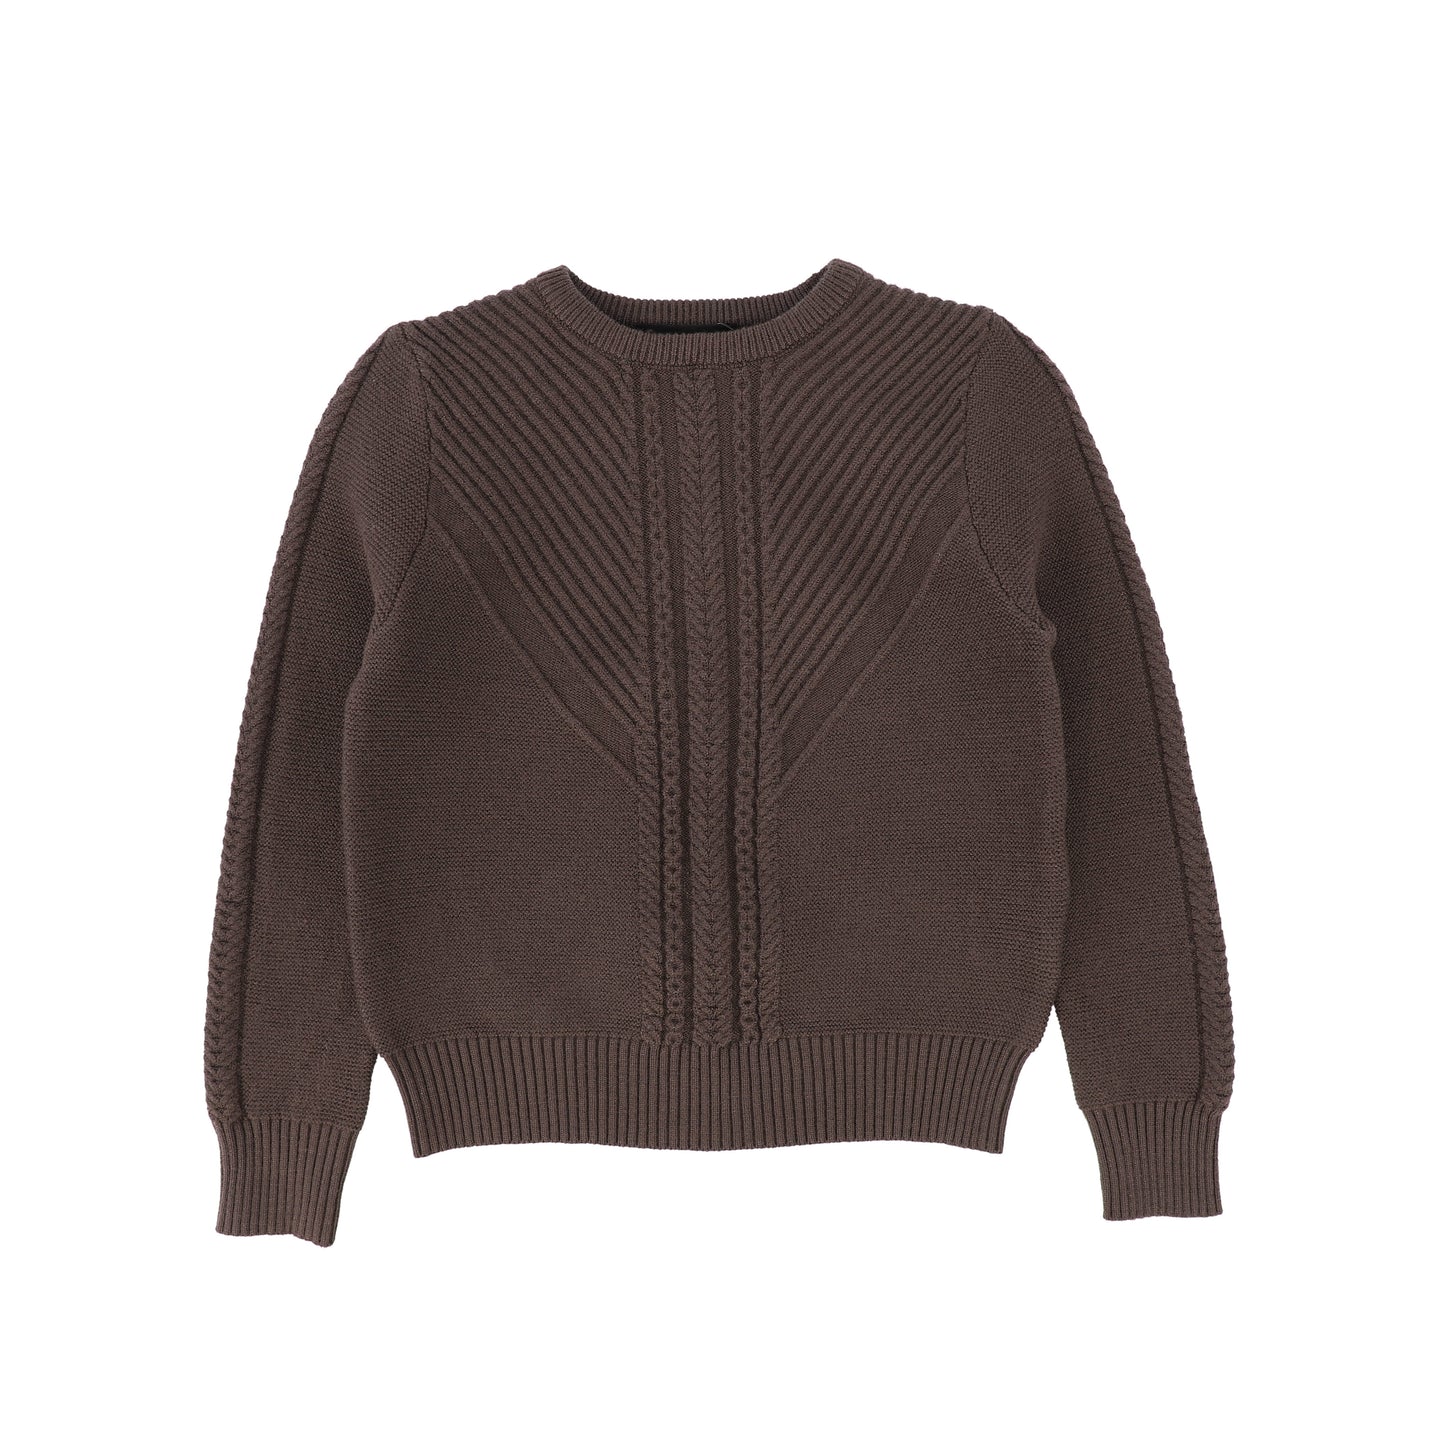 BAMBOO BROWN BRAIDED KNIT SWEATER